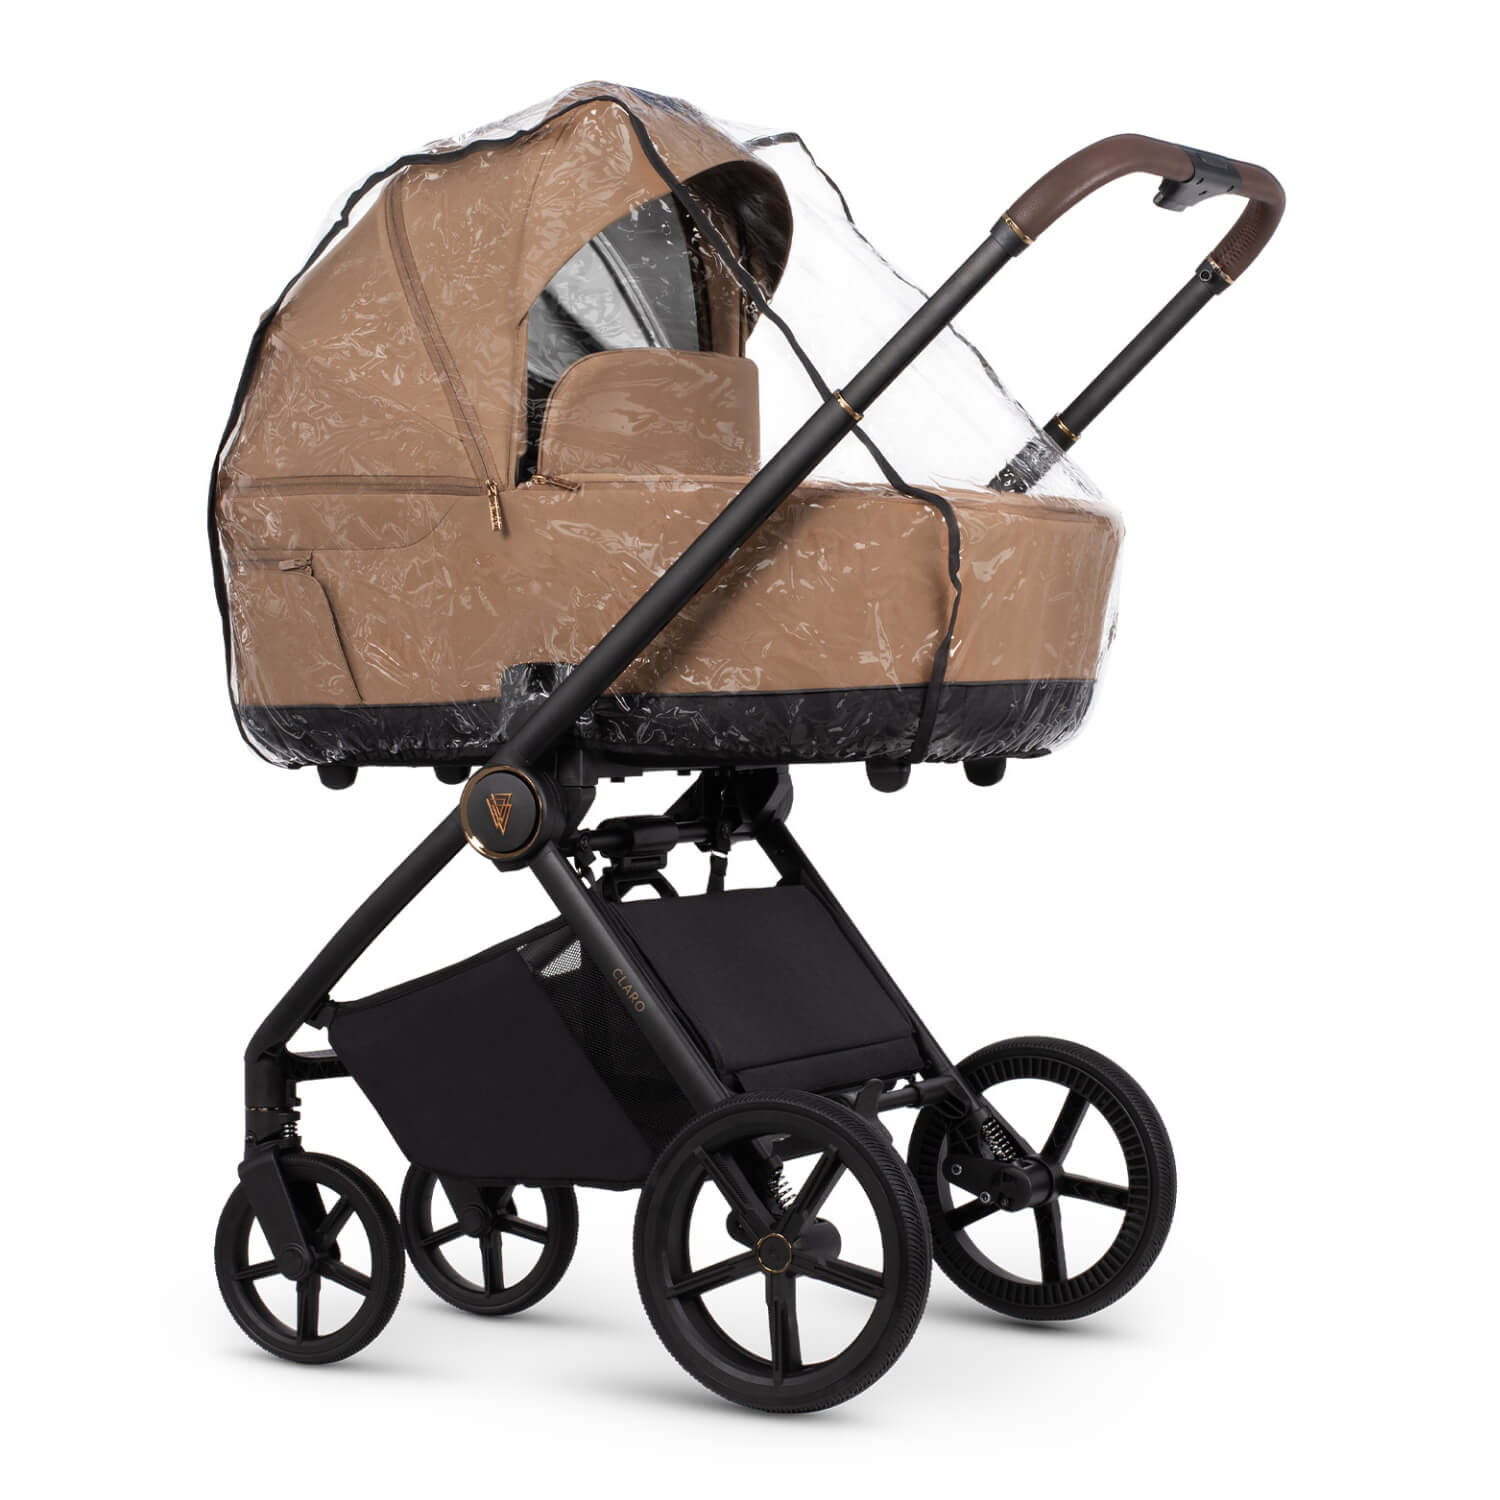 Venicci Claro Pram in Caramel colour with the included clear rain cover attached